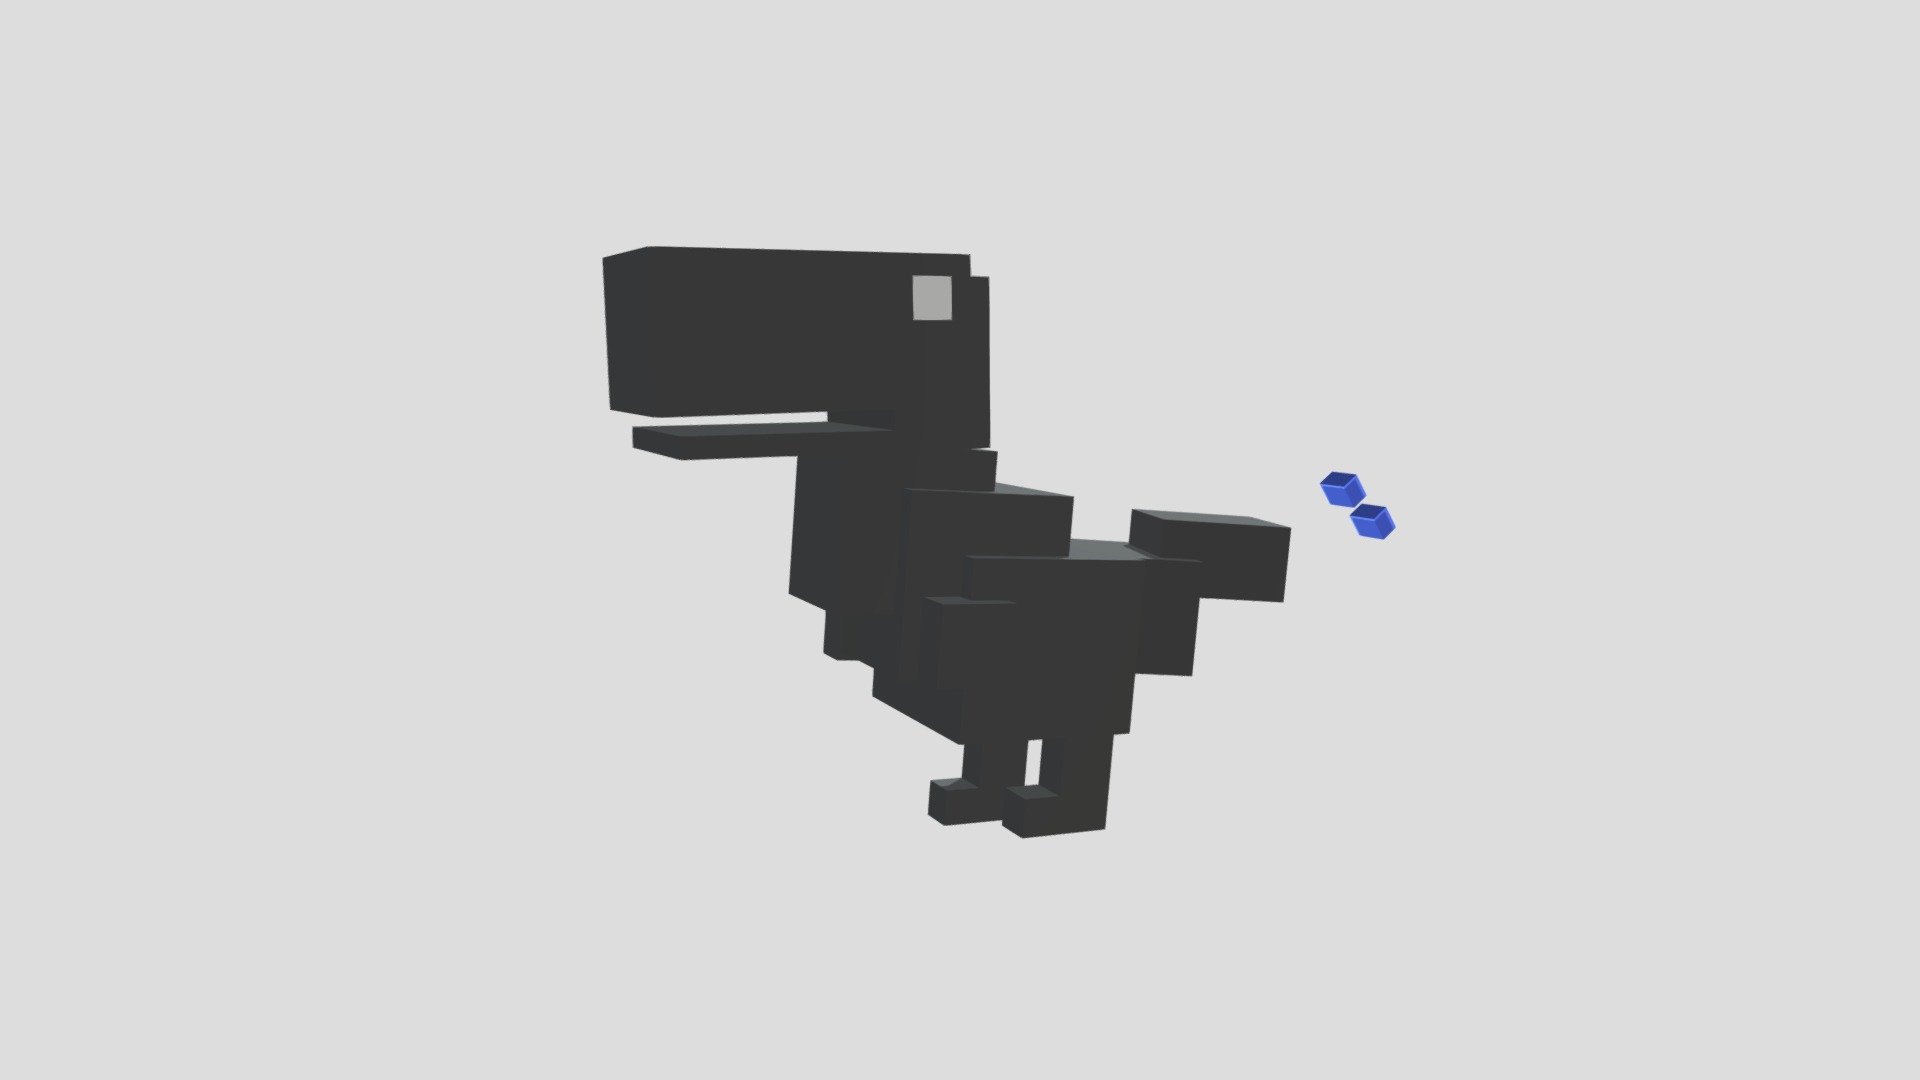 How to Change Character in Chrome Dinosaur Game? - ChromeFixes